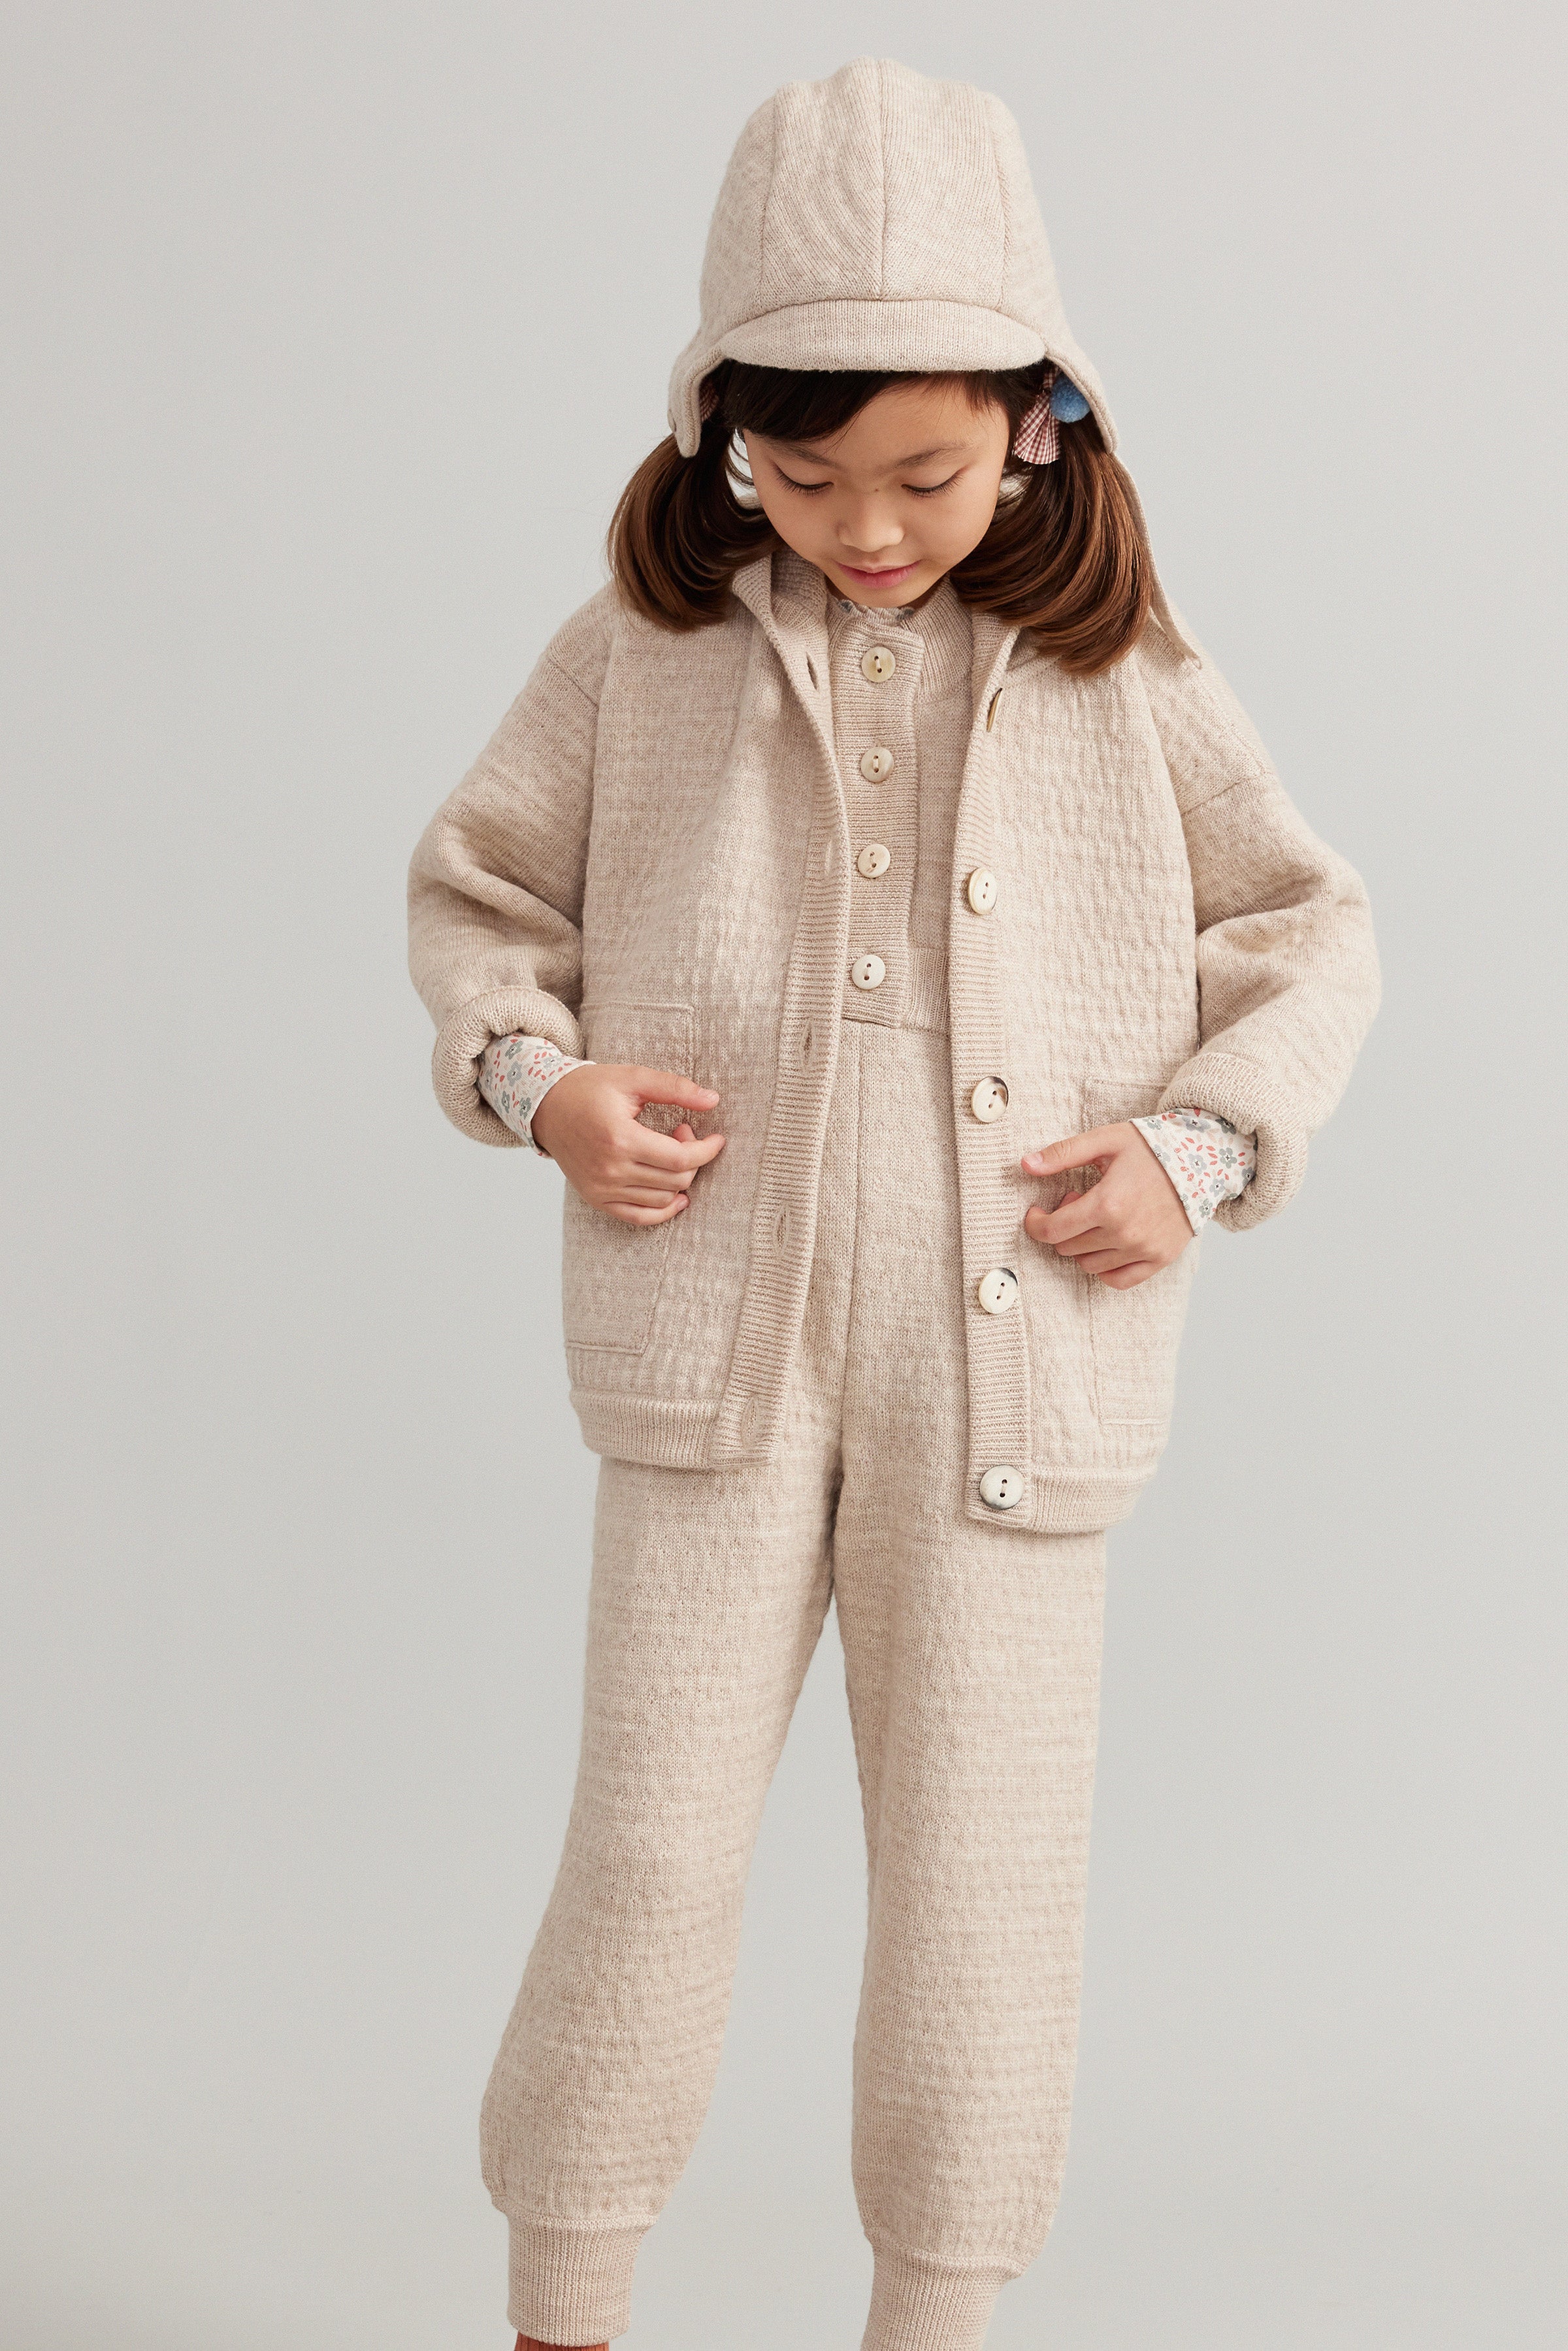 soor ploom Annie Coverall Linen - キッズ服女の子用(90cm~)